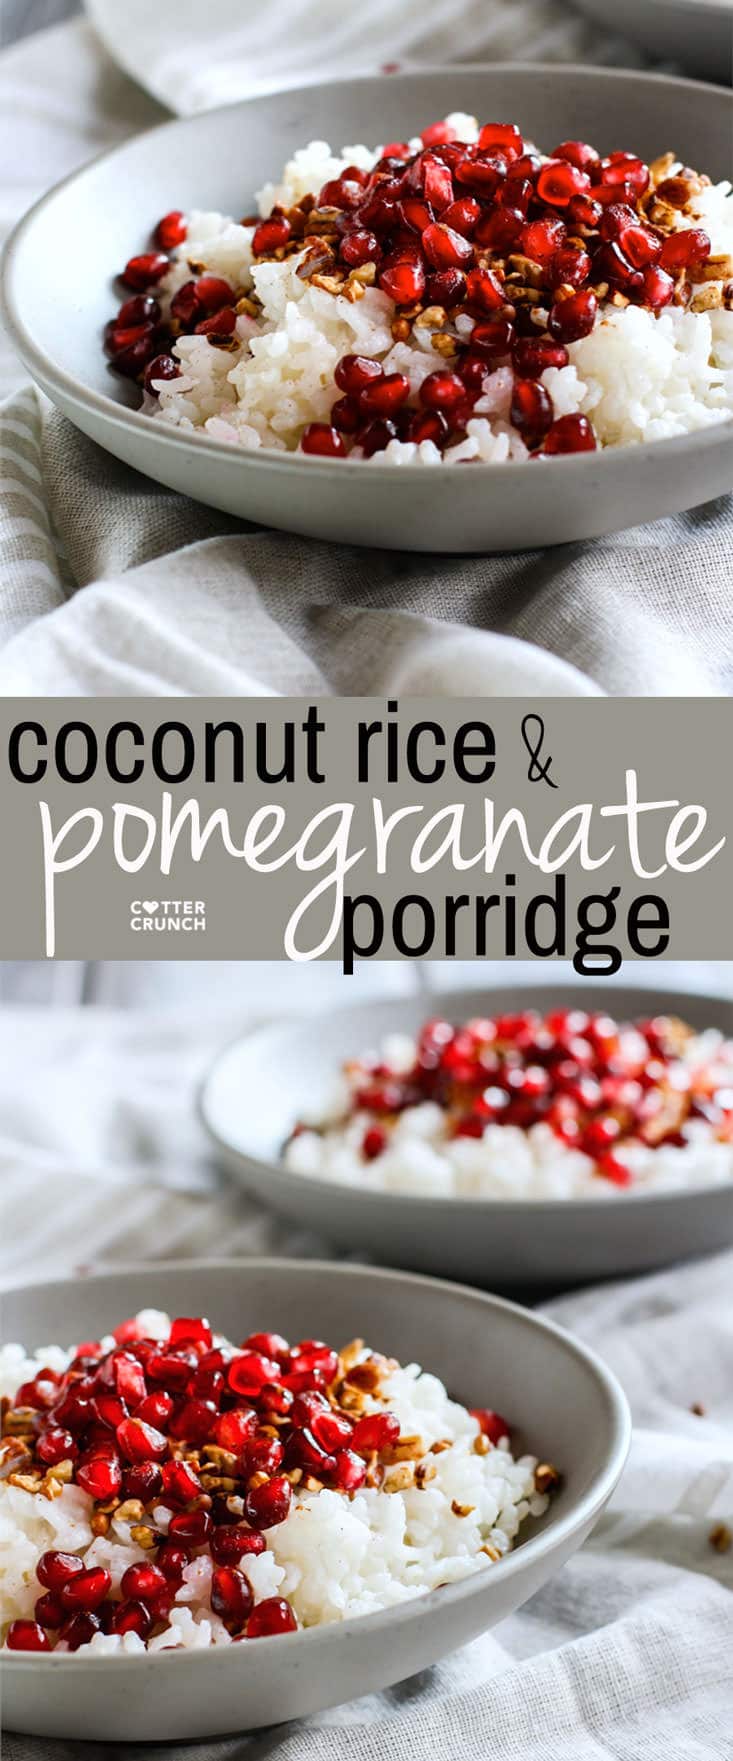 Coconut Rice and Pomegranate Porridge! A nourishing gluten free and dairy free breakfast bowl made with jasmine rice, coconut milk or cream, cinnamon, maple syrup, nuts, and cinnamon. We call this the performance carb porridge because of the budget friendly jasmine rice which makes great fuel when combined with other nutrient dense foods!